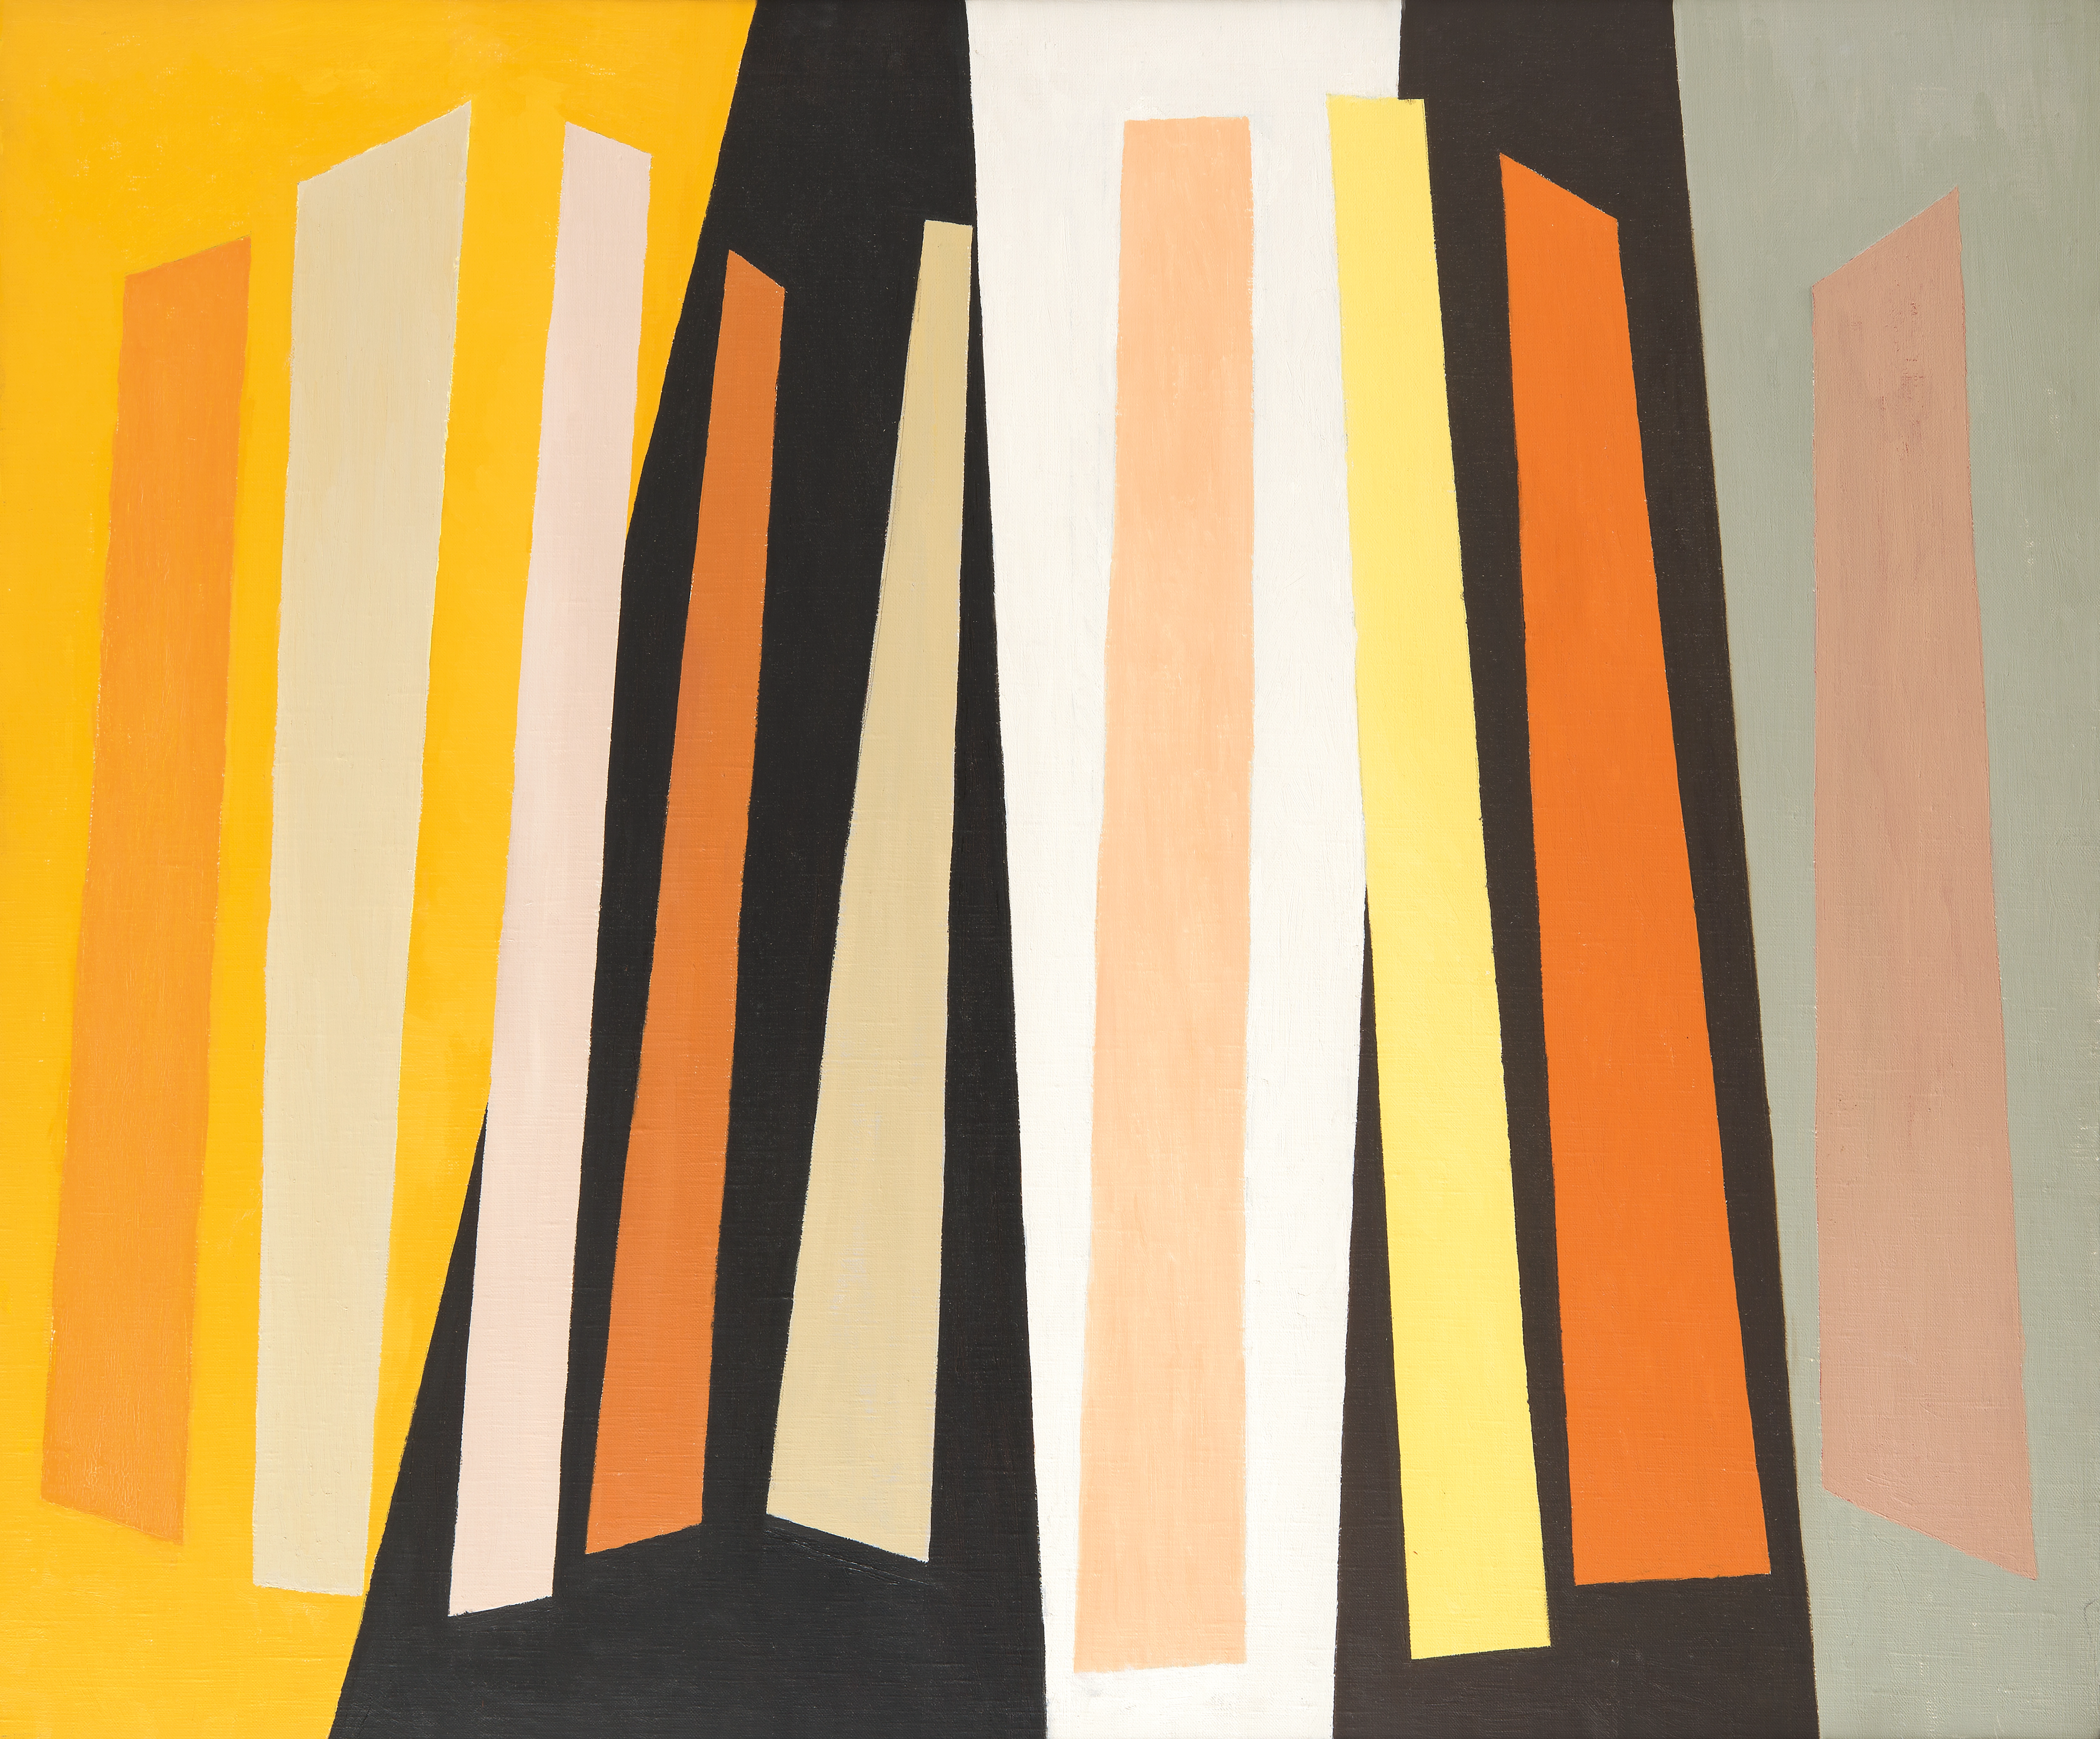 Oil on canvas painting of slightly skewed vertical bars made of varying orange and yellow tones. The bars are on top of a background that is split into 5 colors from left to right — yellow, black, white, black, and grey.